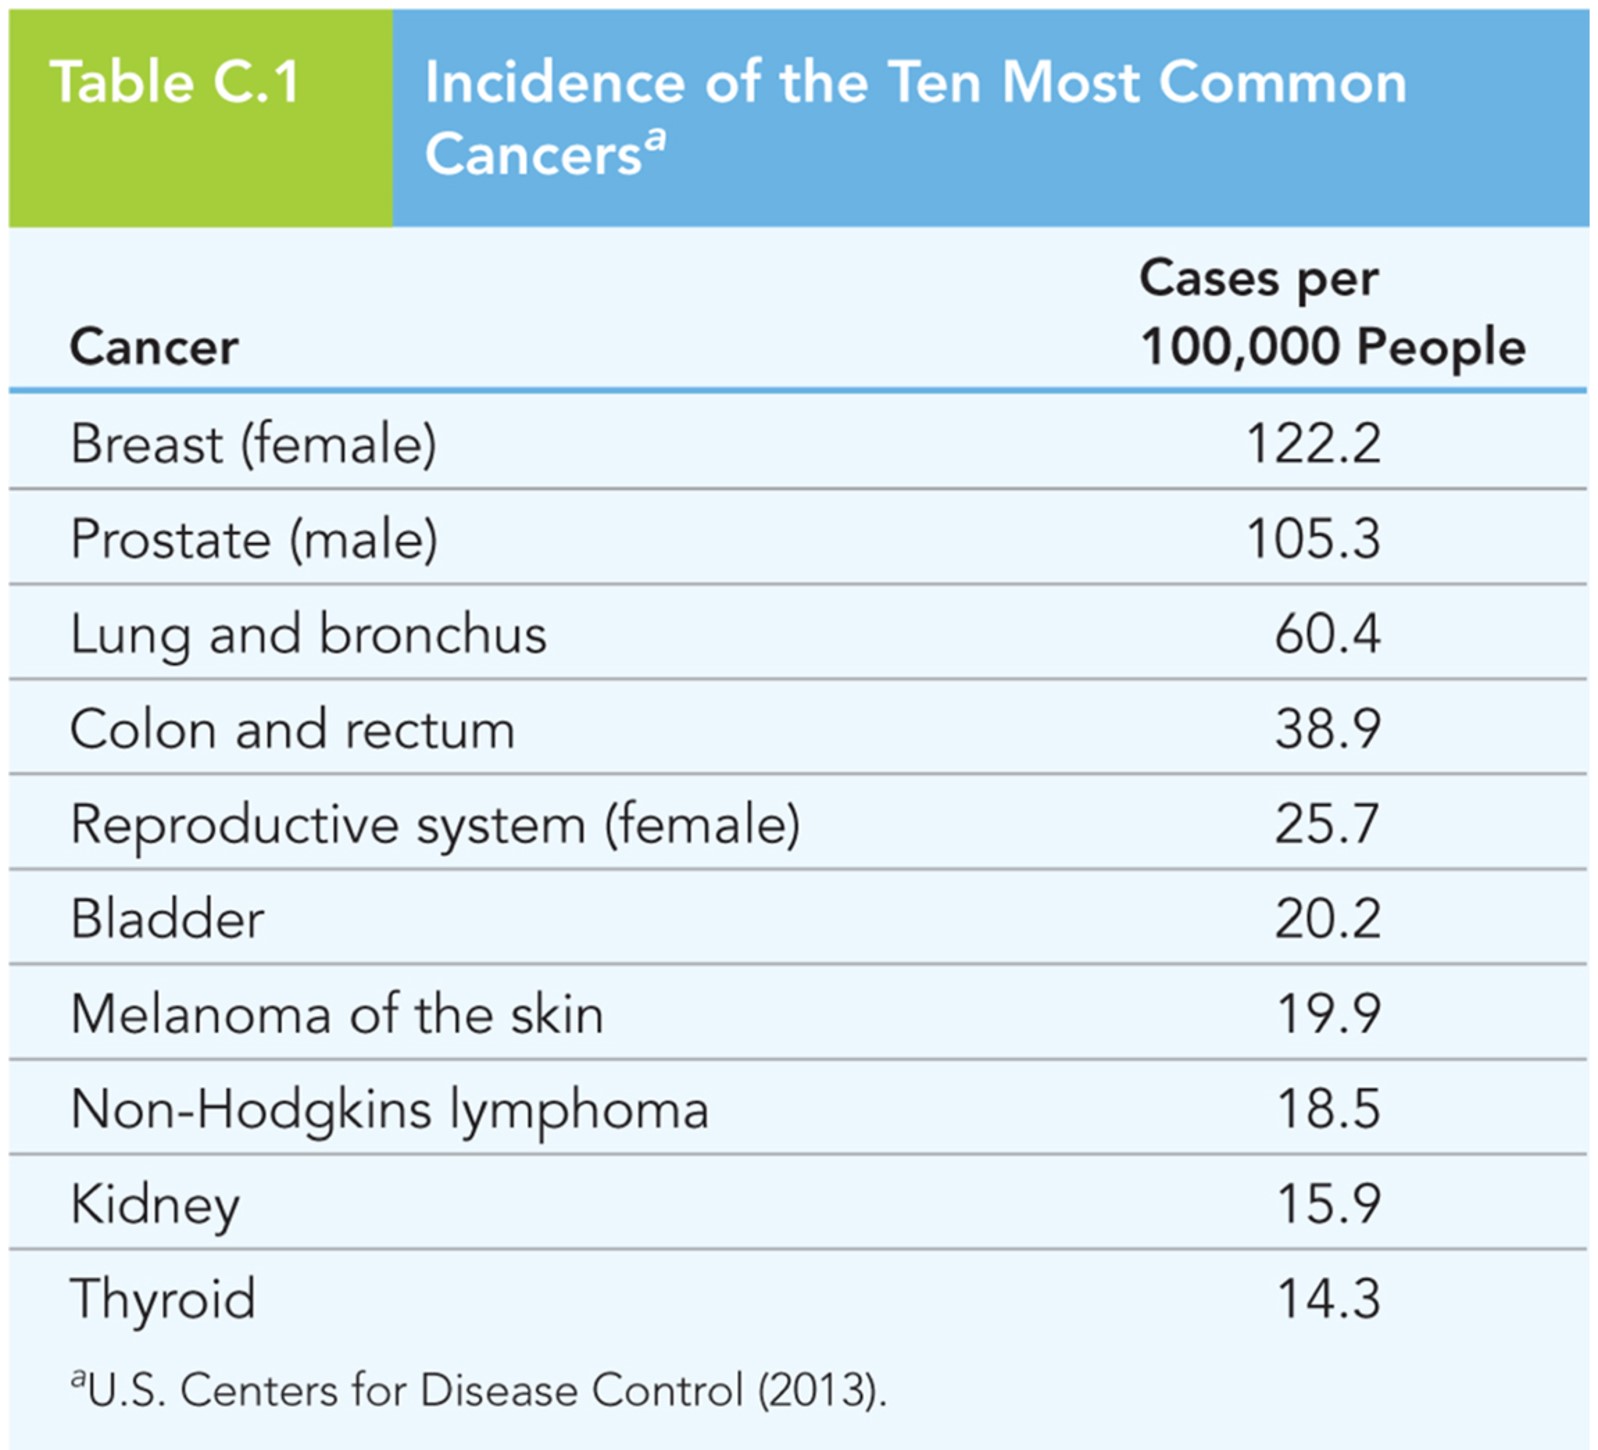 Incidence of the Ten Most Common Cancers